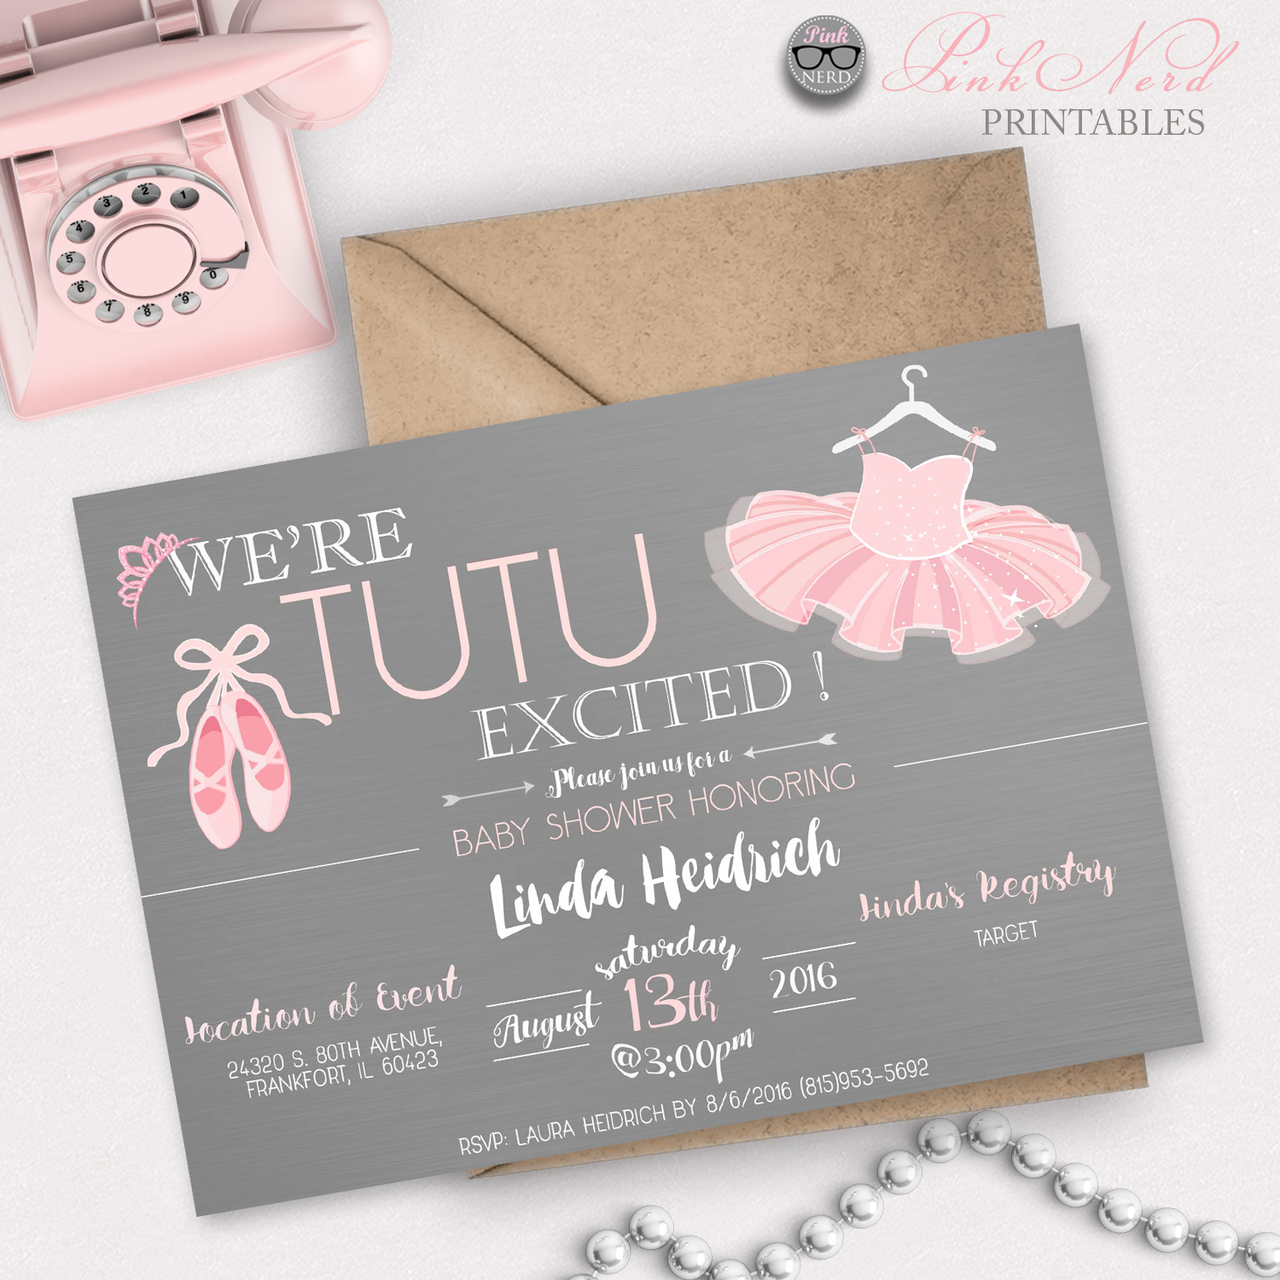 Full Size of Baby Shower:63+ Delightful Cheap Baby Shower Invitations Image Inspirations Cheap Baby Shower Invitations Baby Shower Accessories Cute Baby Shower Gifts Baby Shower Ideas For Boys Baby Shower Props Baby Shower Restaurants